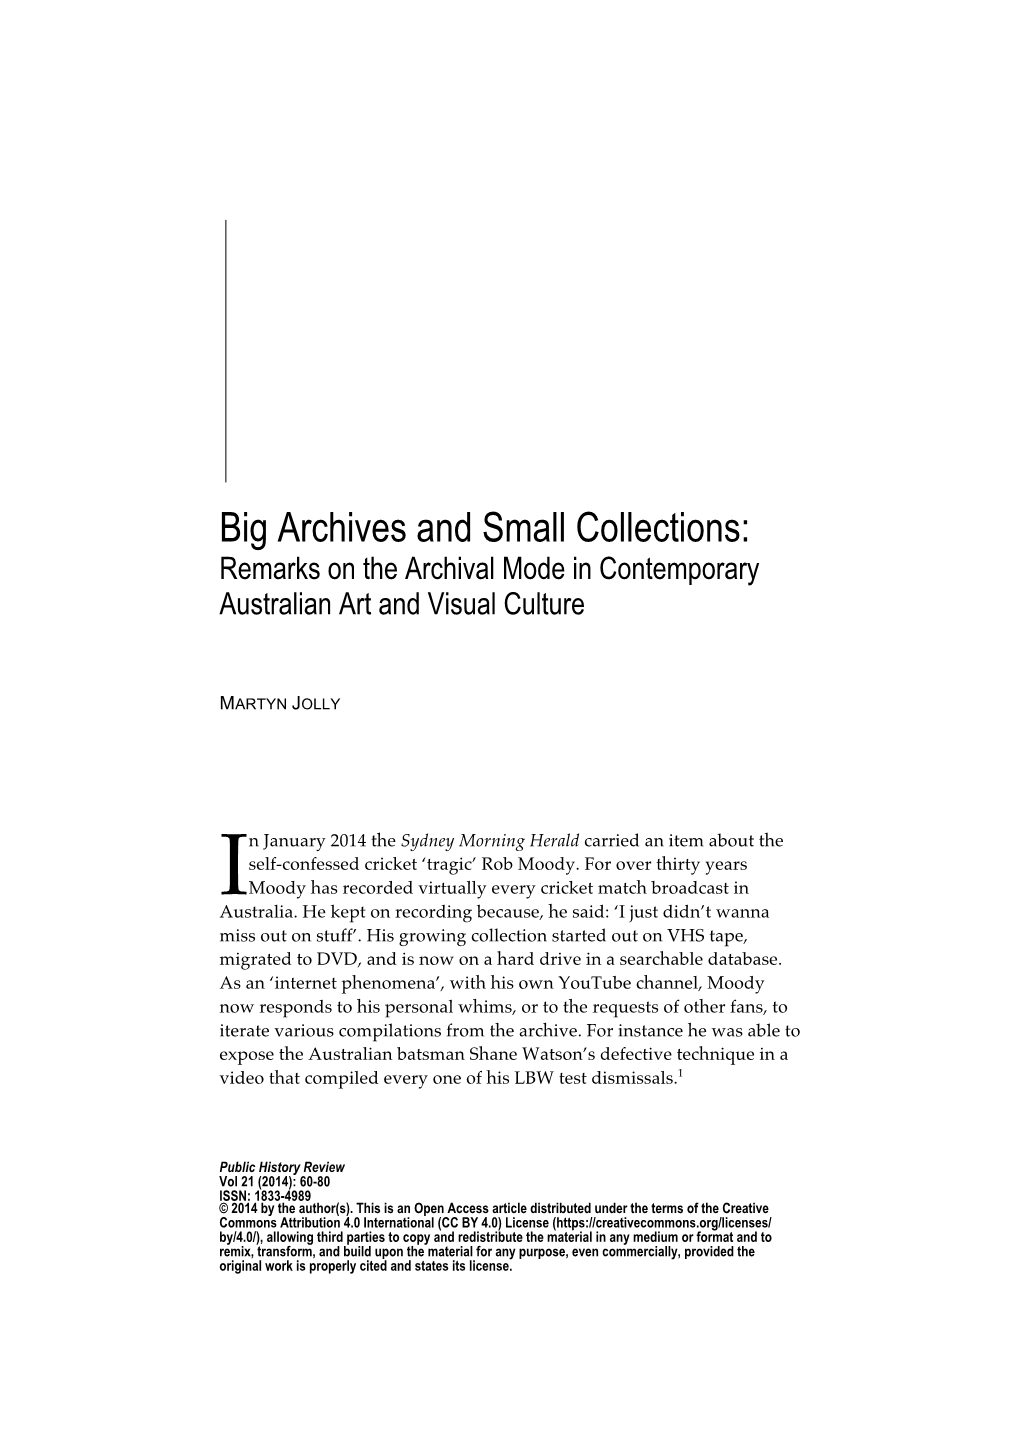 Big Archives and Small Collections: Remarks on the Archival Mode in Contemporary Australian Art and Visual Culture